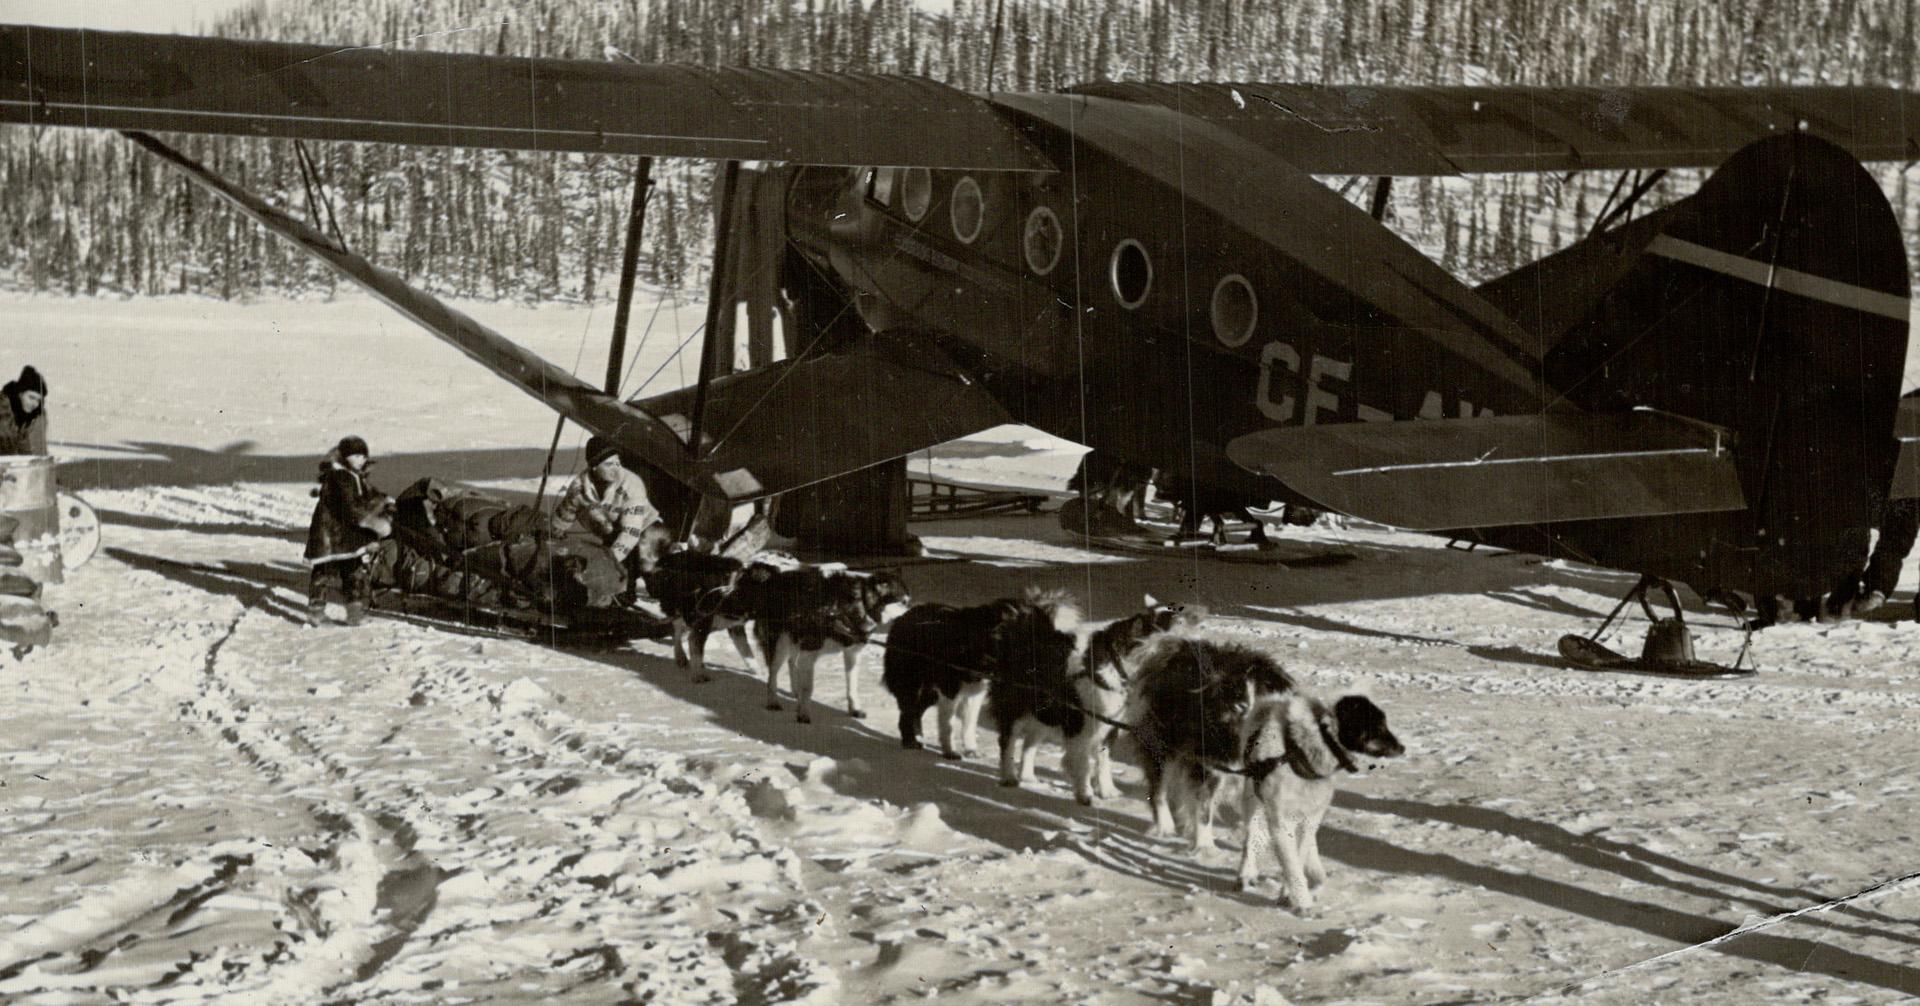 All supplies at great bear have to be flown in and ore is flown out to be refined at Port Hope, Ont